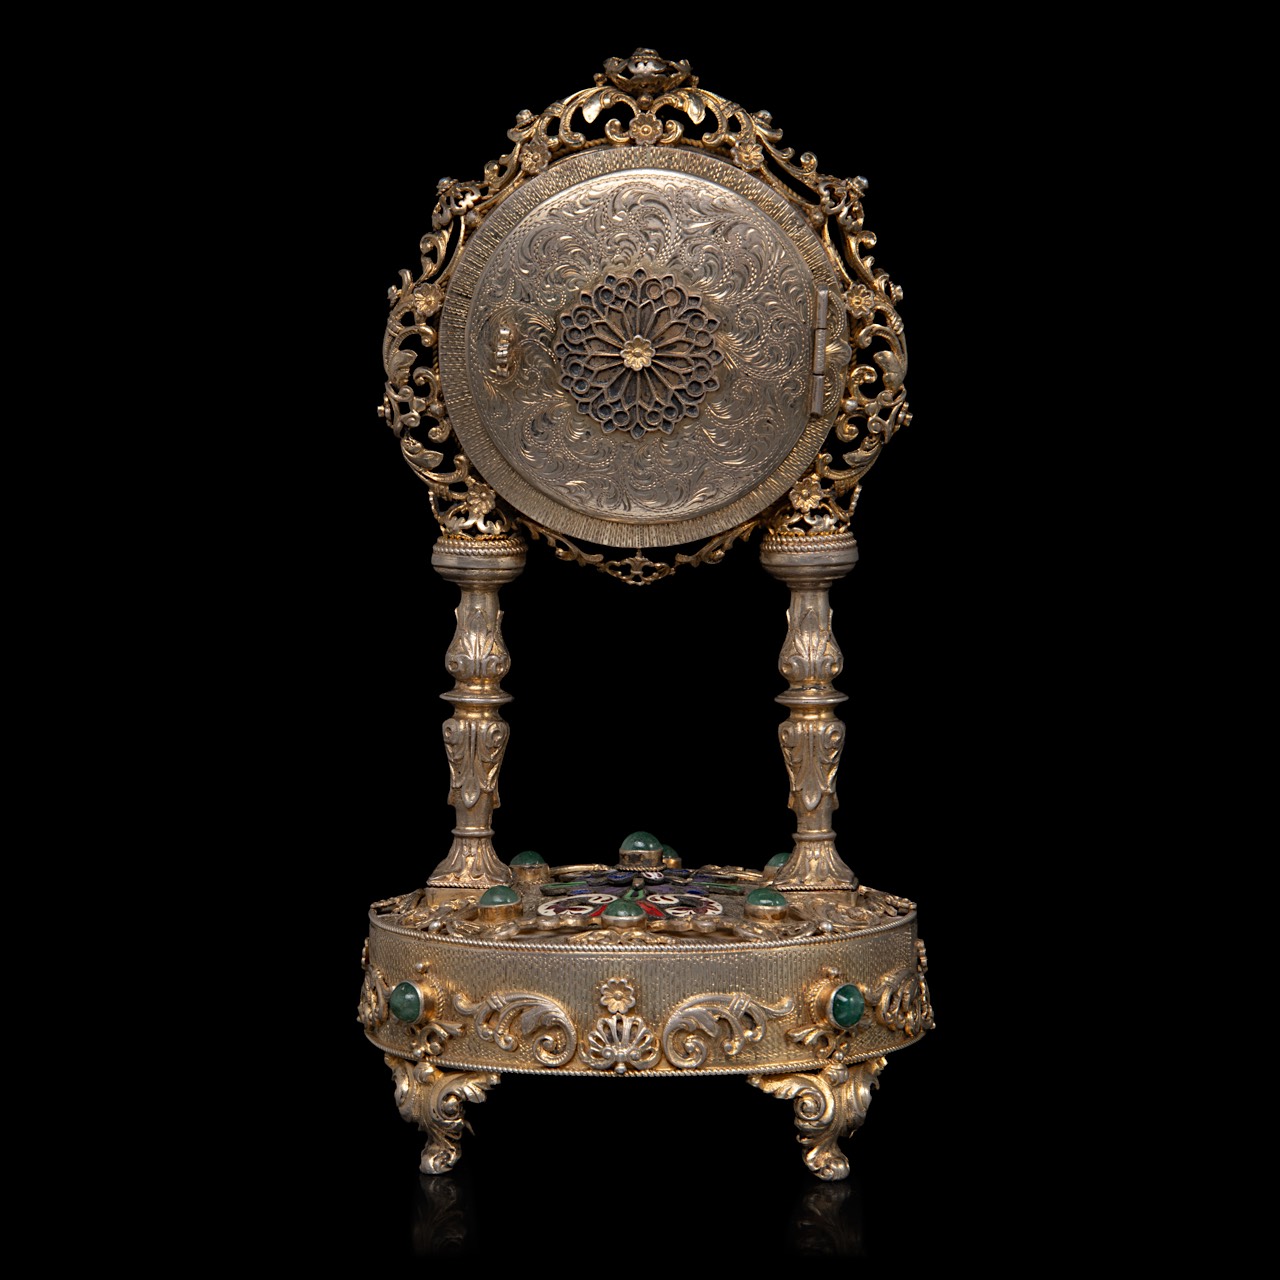 An Austrian gilt-silver and enamel clock with music box, decorated with semi-precious stones and mot - Image 4 of 7